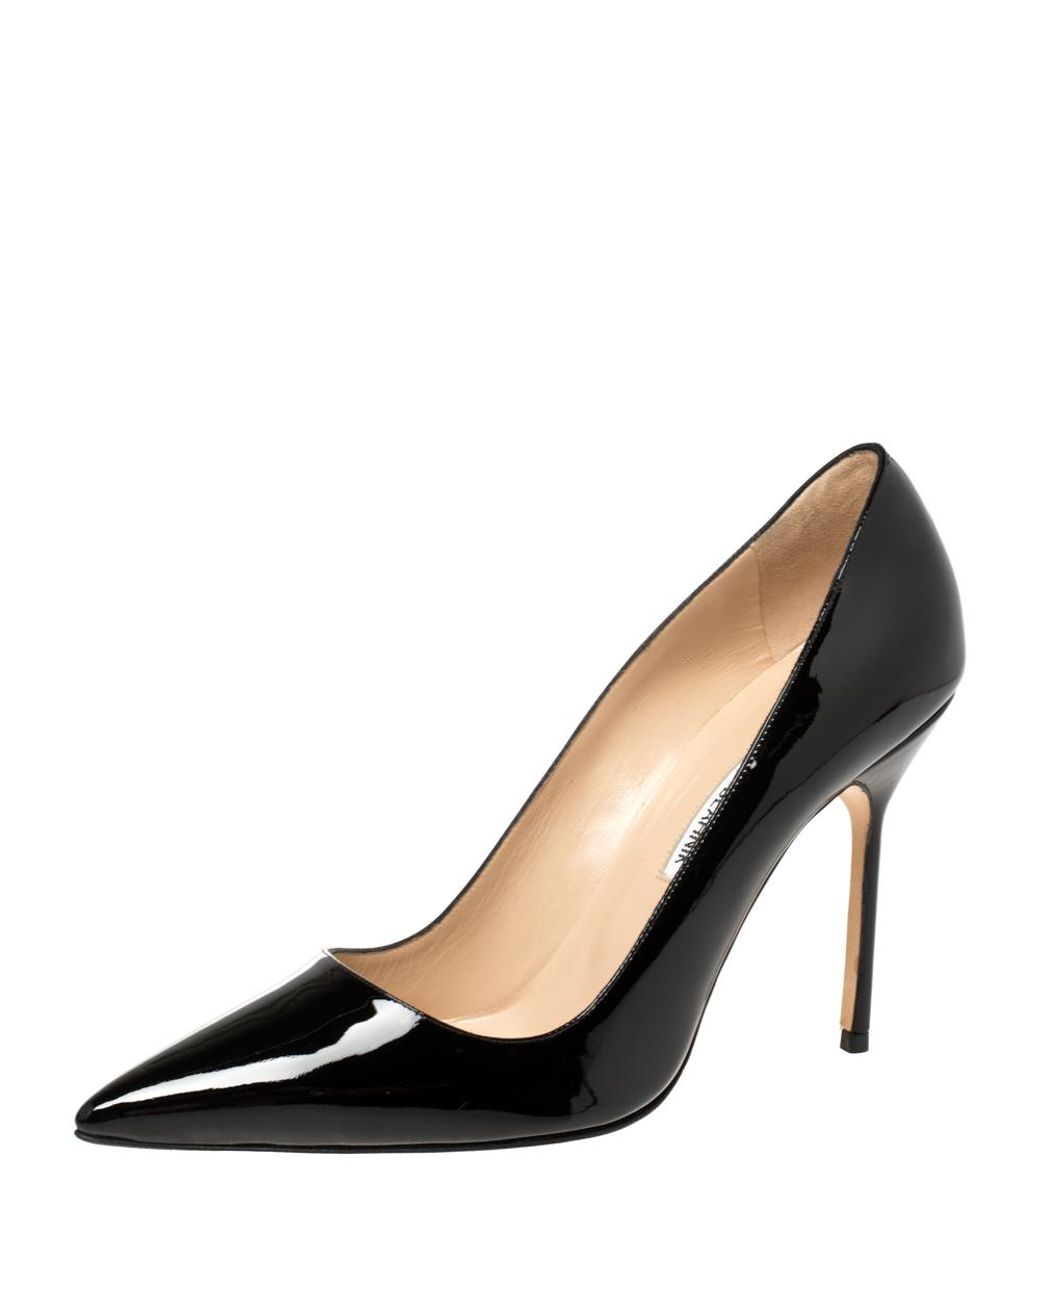 Manolo Blahnik Black Patent Leather Bb Pointed Toe Pumps - Lyst